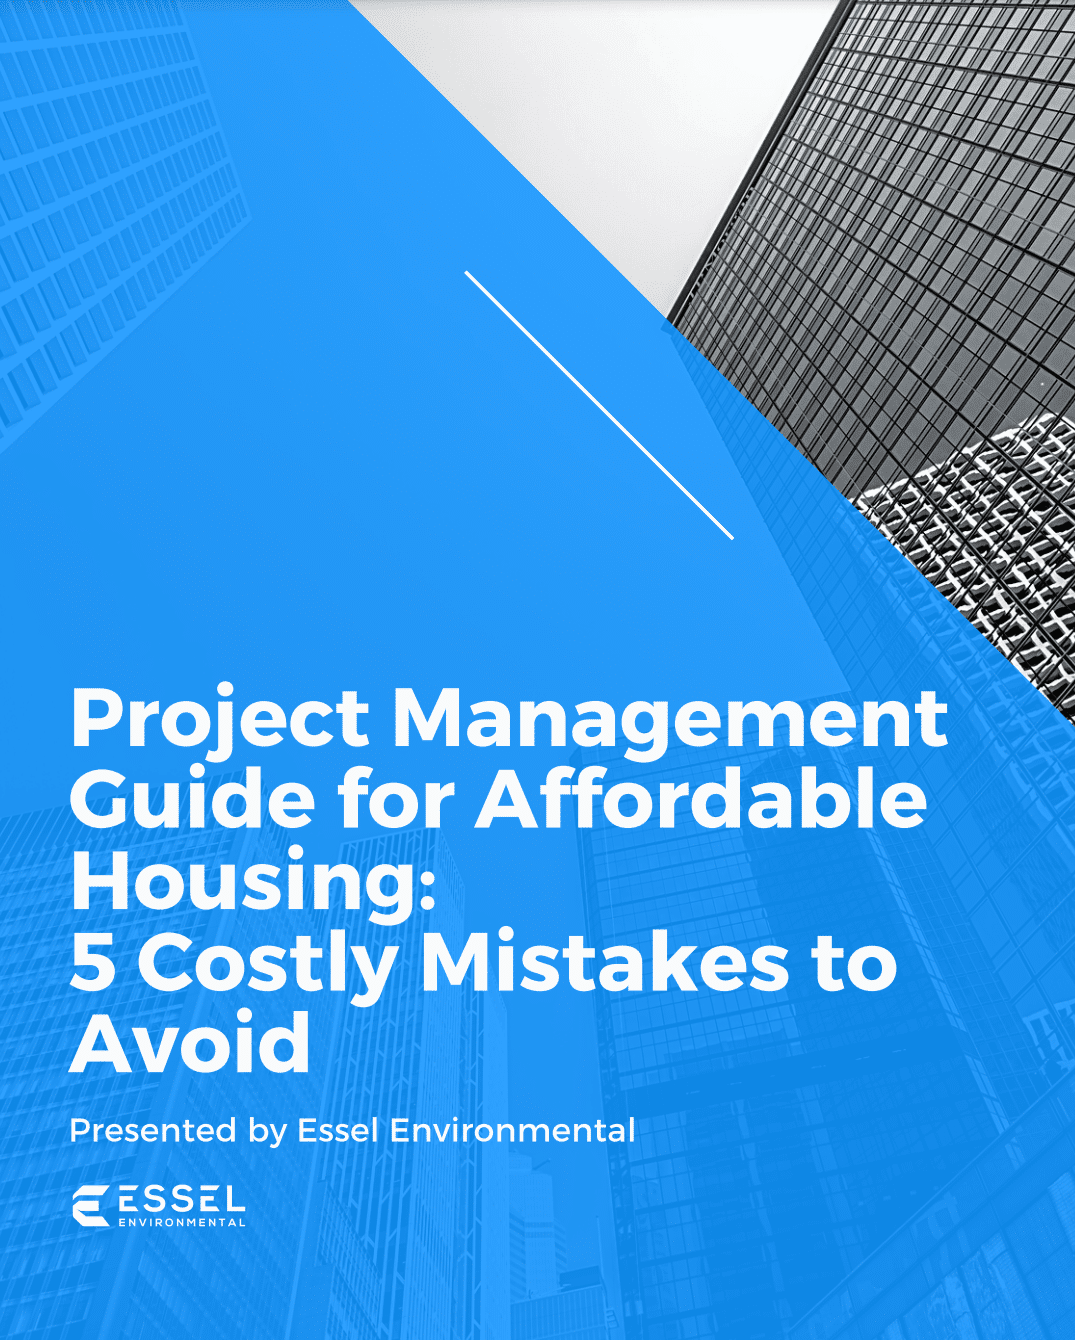 Project Manager's Guide for AFH